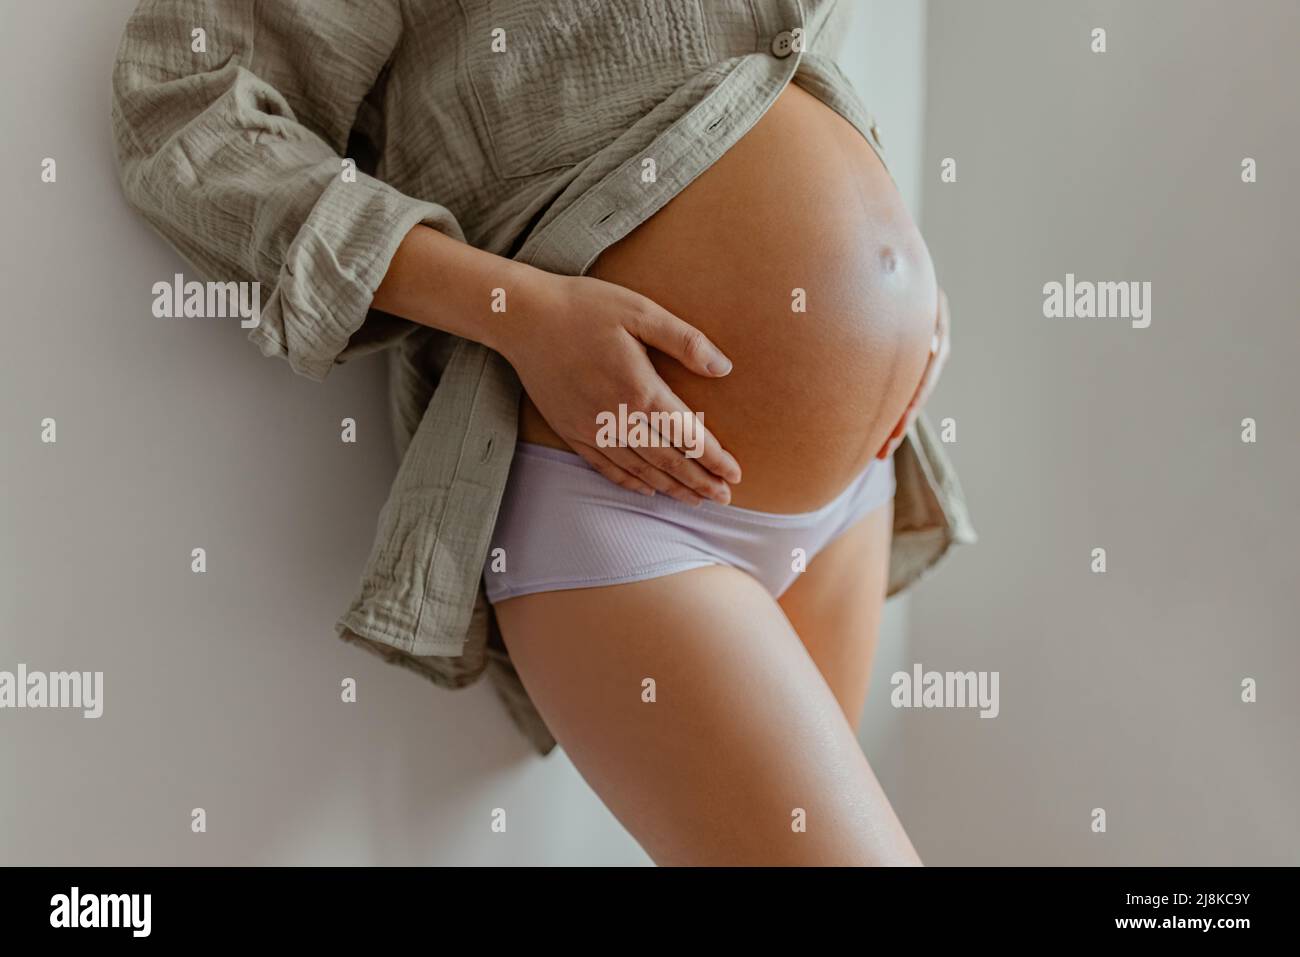 Pregnant woman wearing maternity underwear pajamas at home relaxing holding expecting tummy for skincare, health, lifestyle. Pregnancy belly closeup Stock Photo